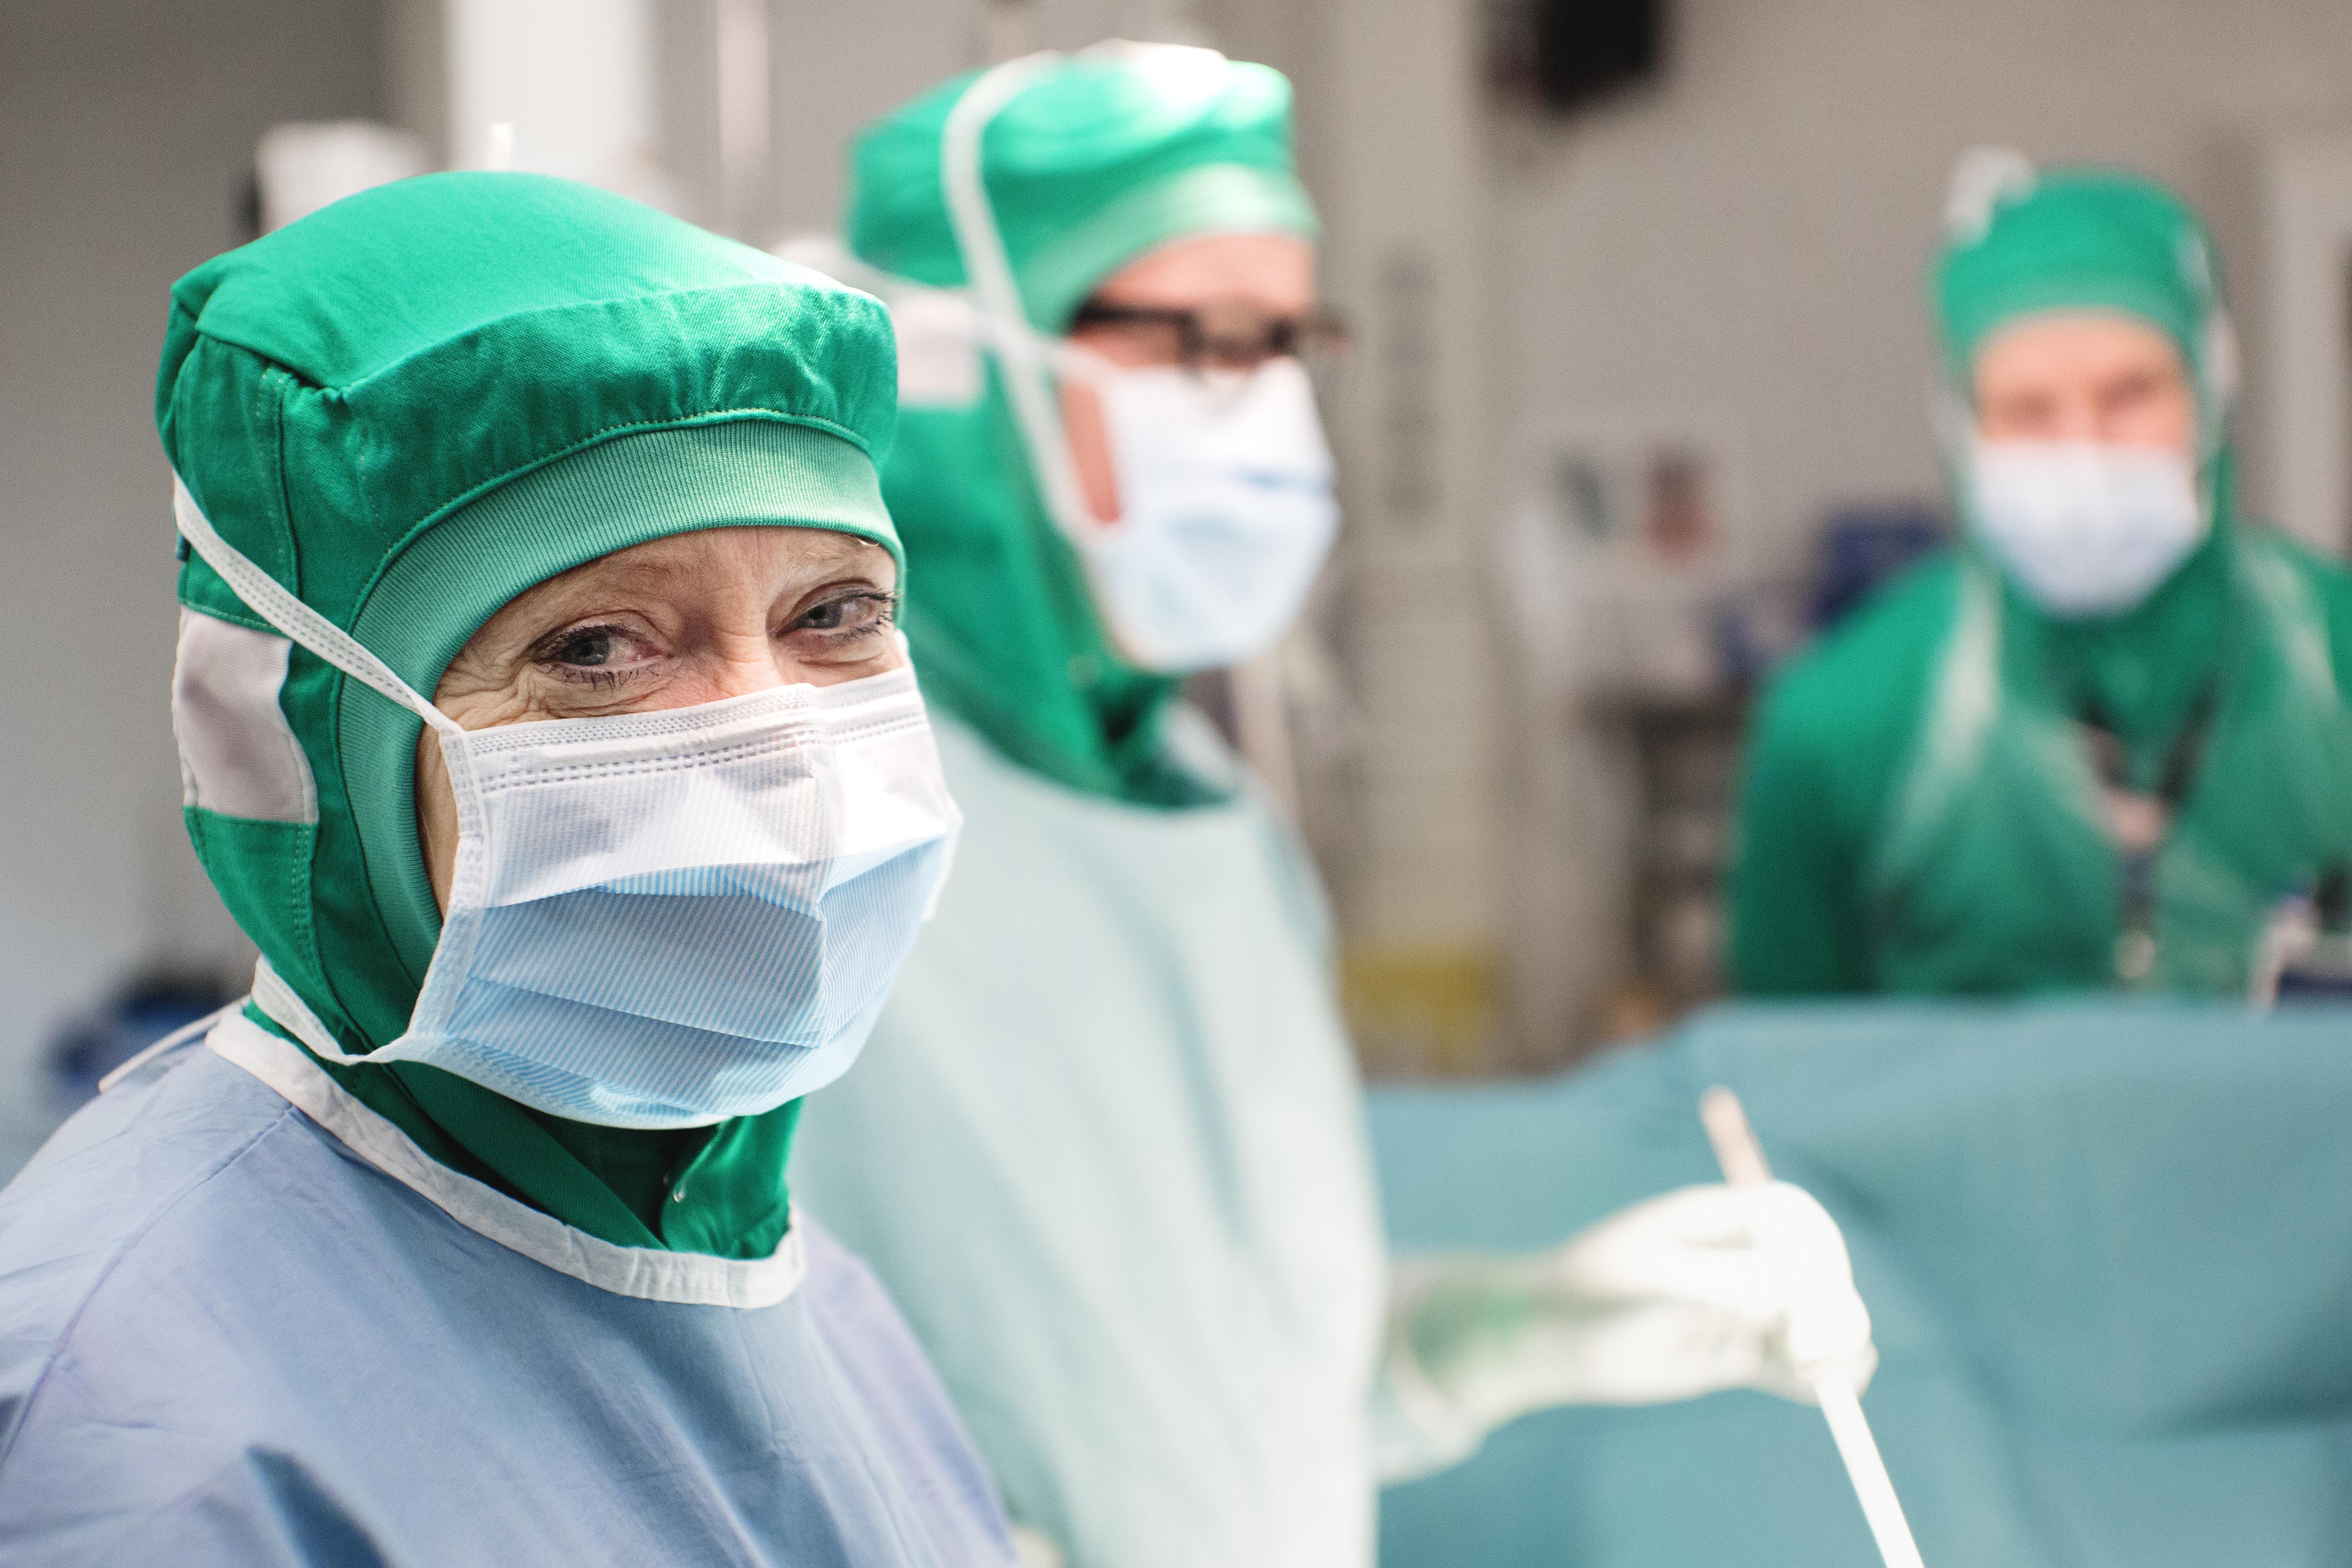 Staff in an operating theatre